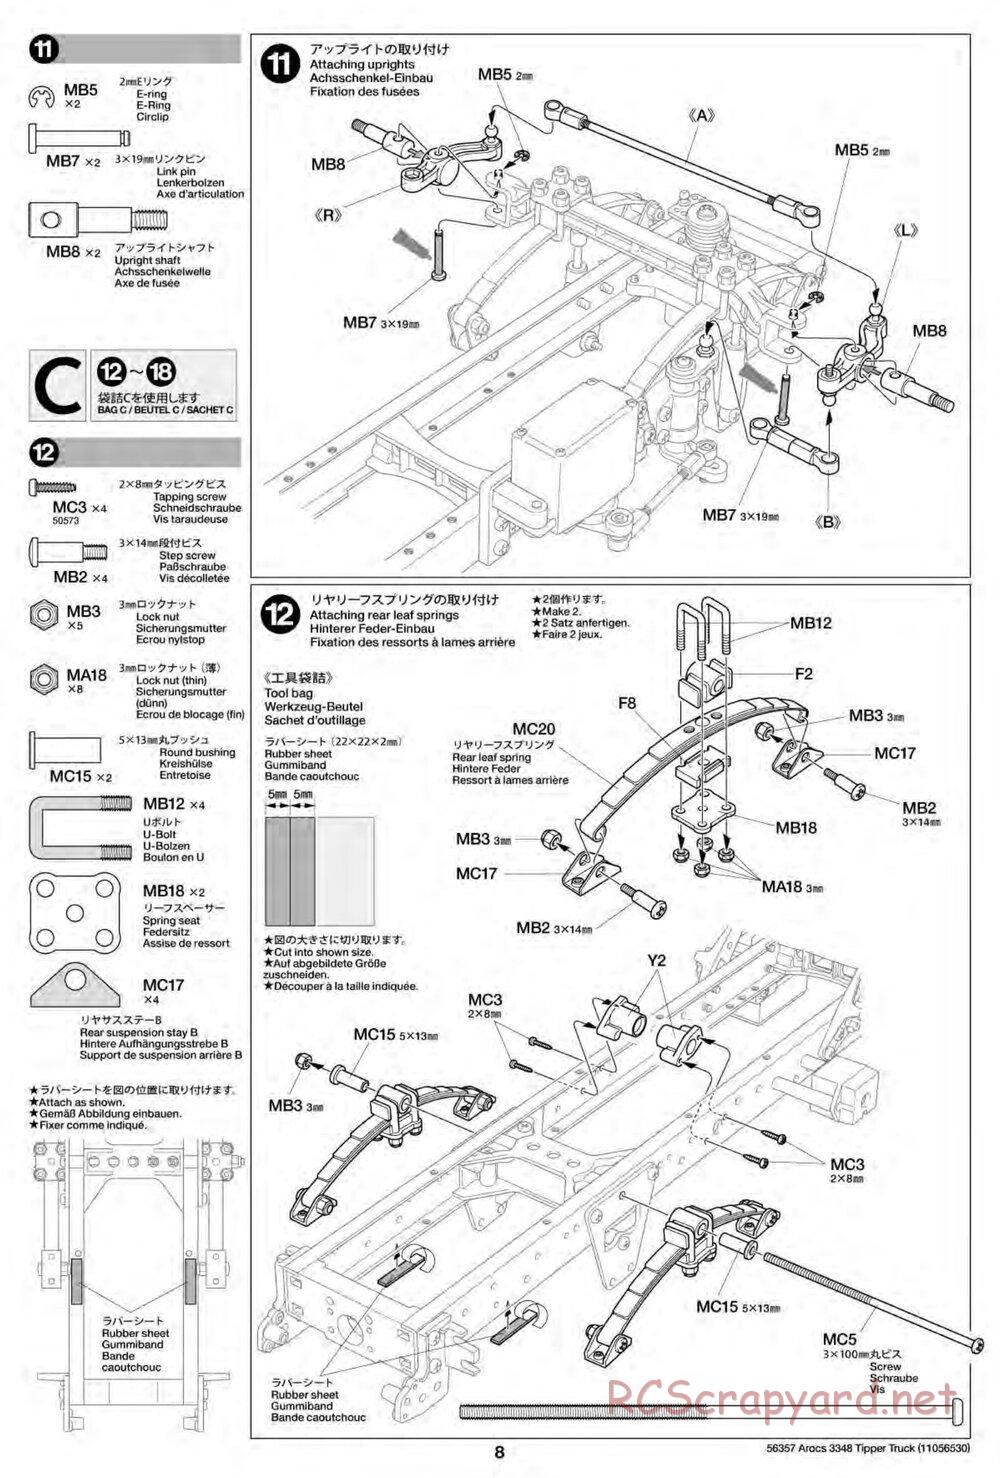 Tamiya - Mercedes-Benz Arocs 3348 6x4 Tipper Truck Chassis - Manual - Page 8